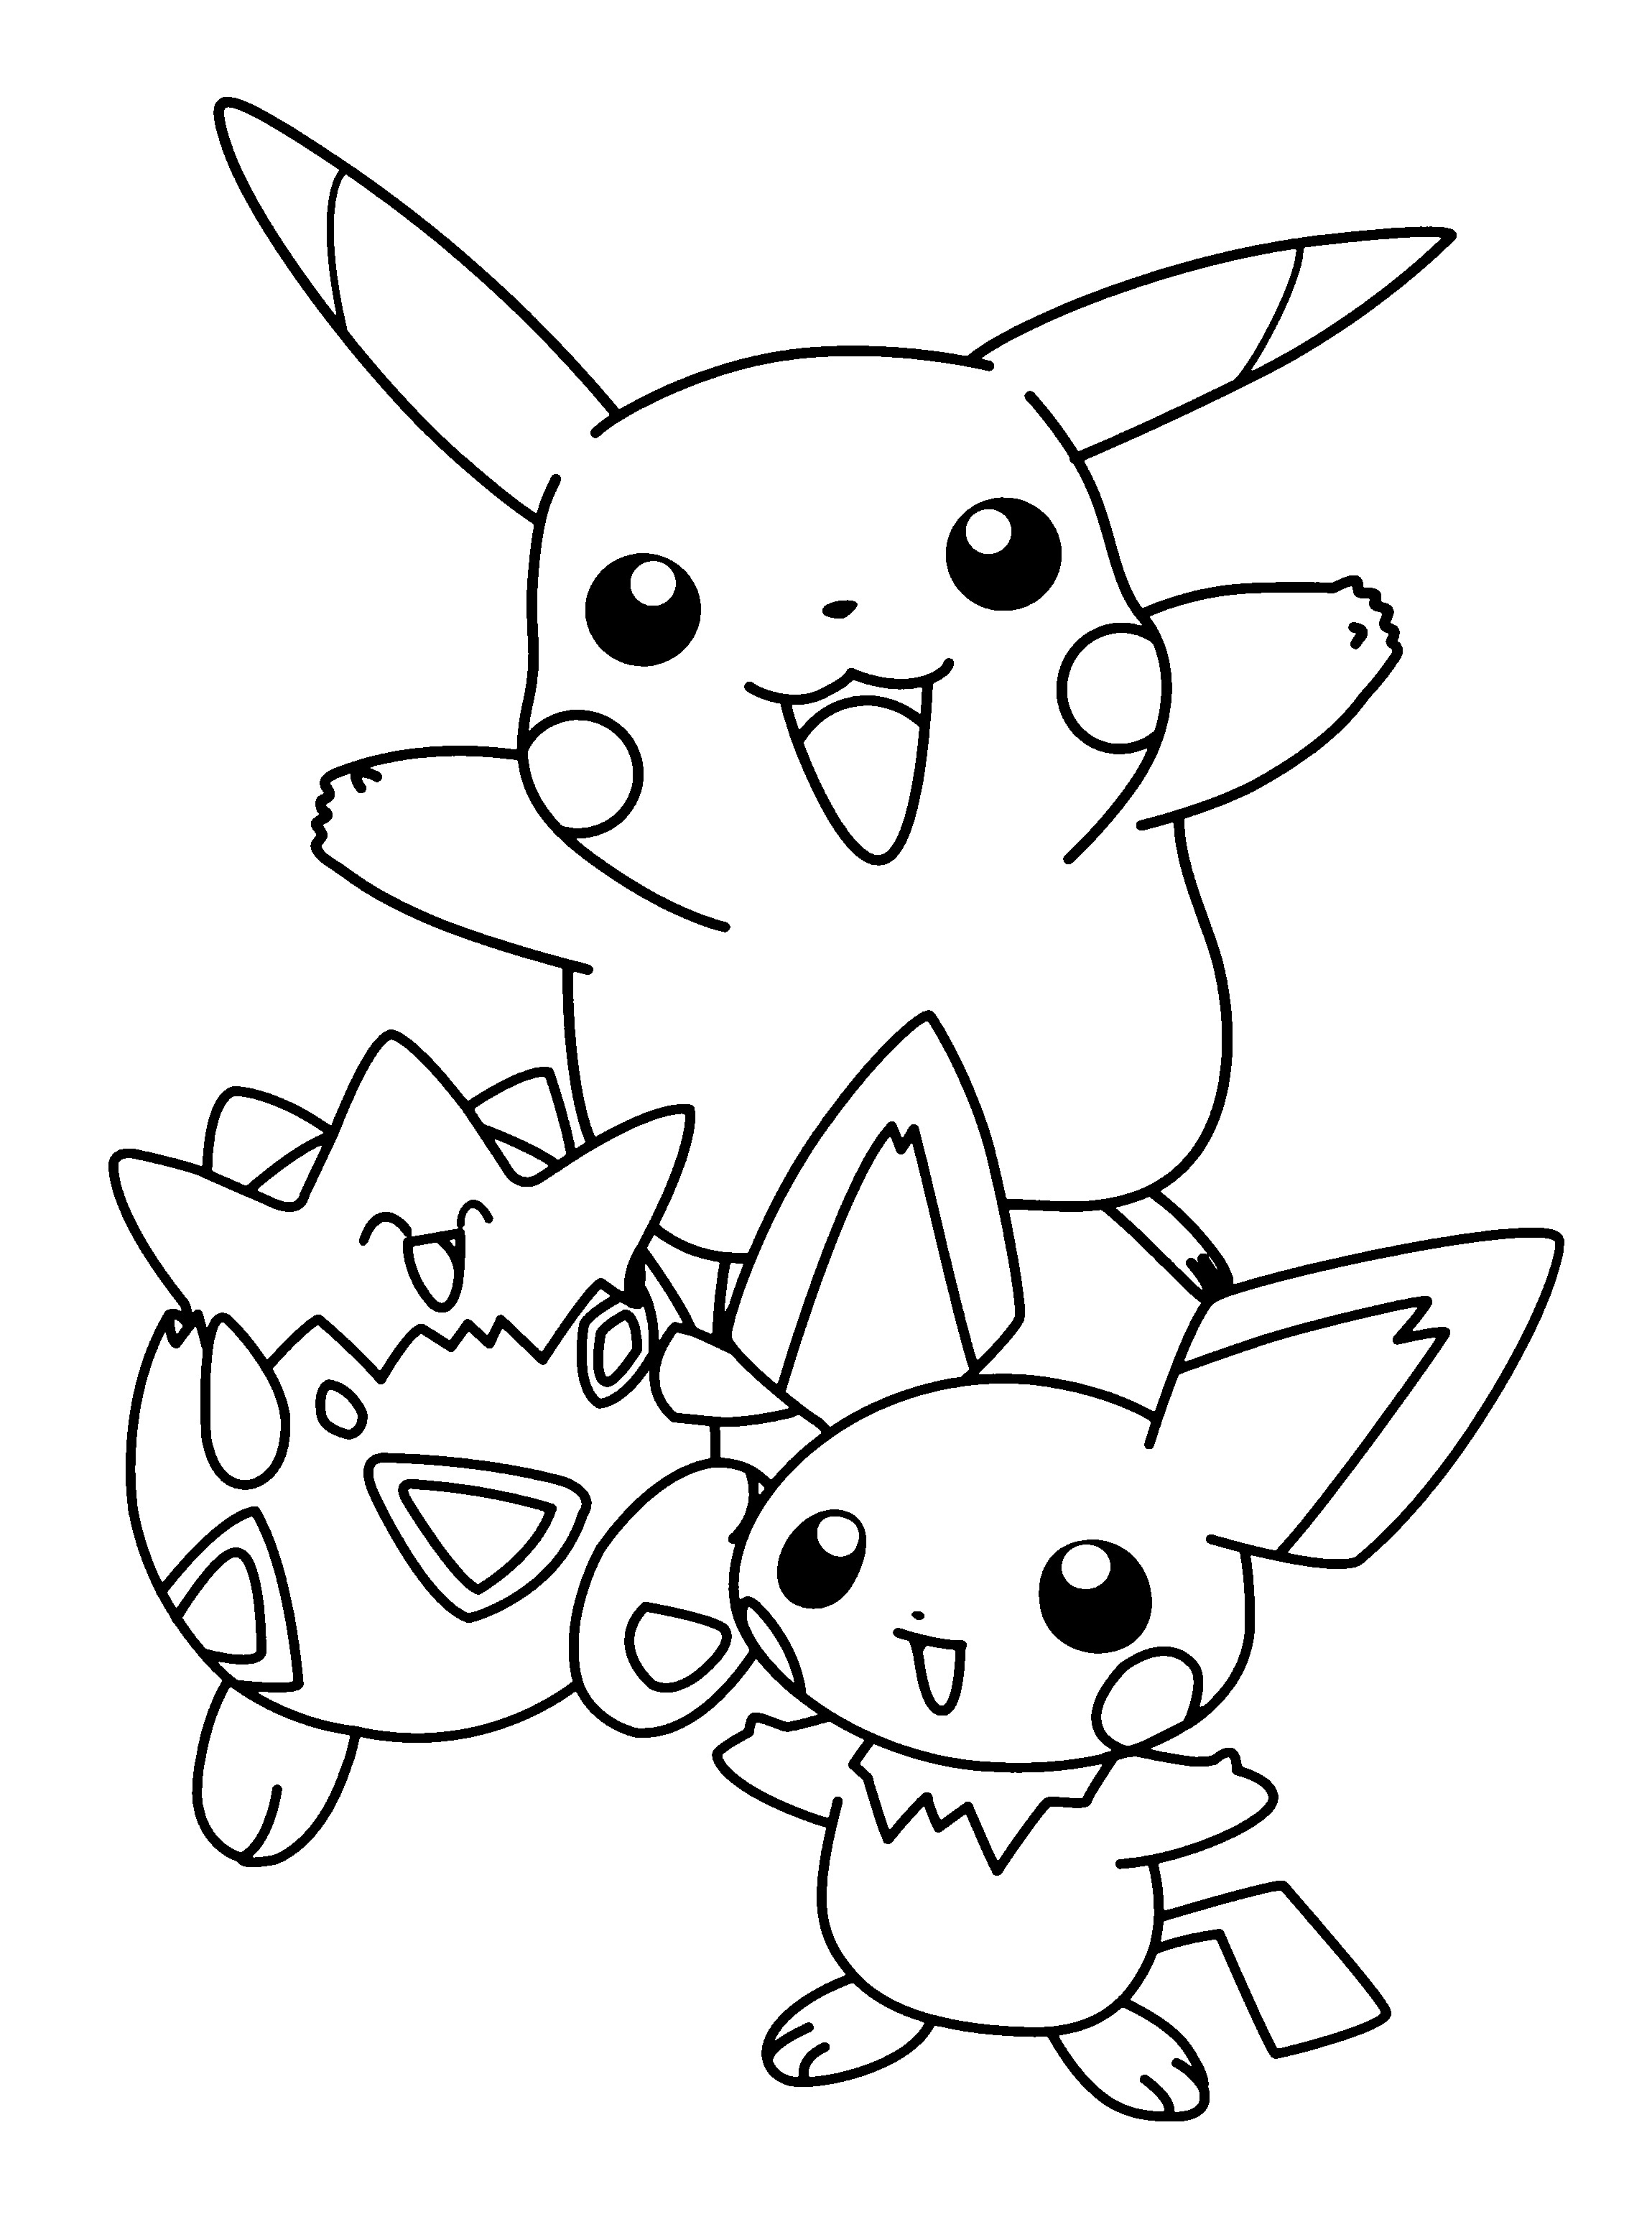 Lego Pikachu Coloring Pages